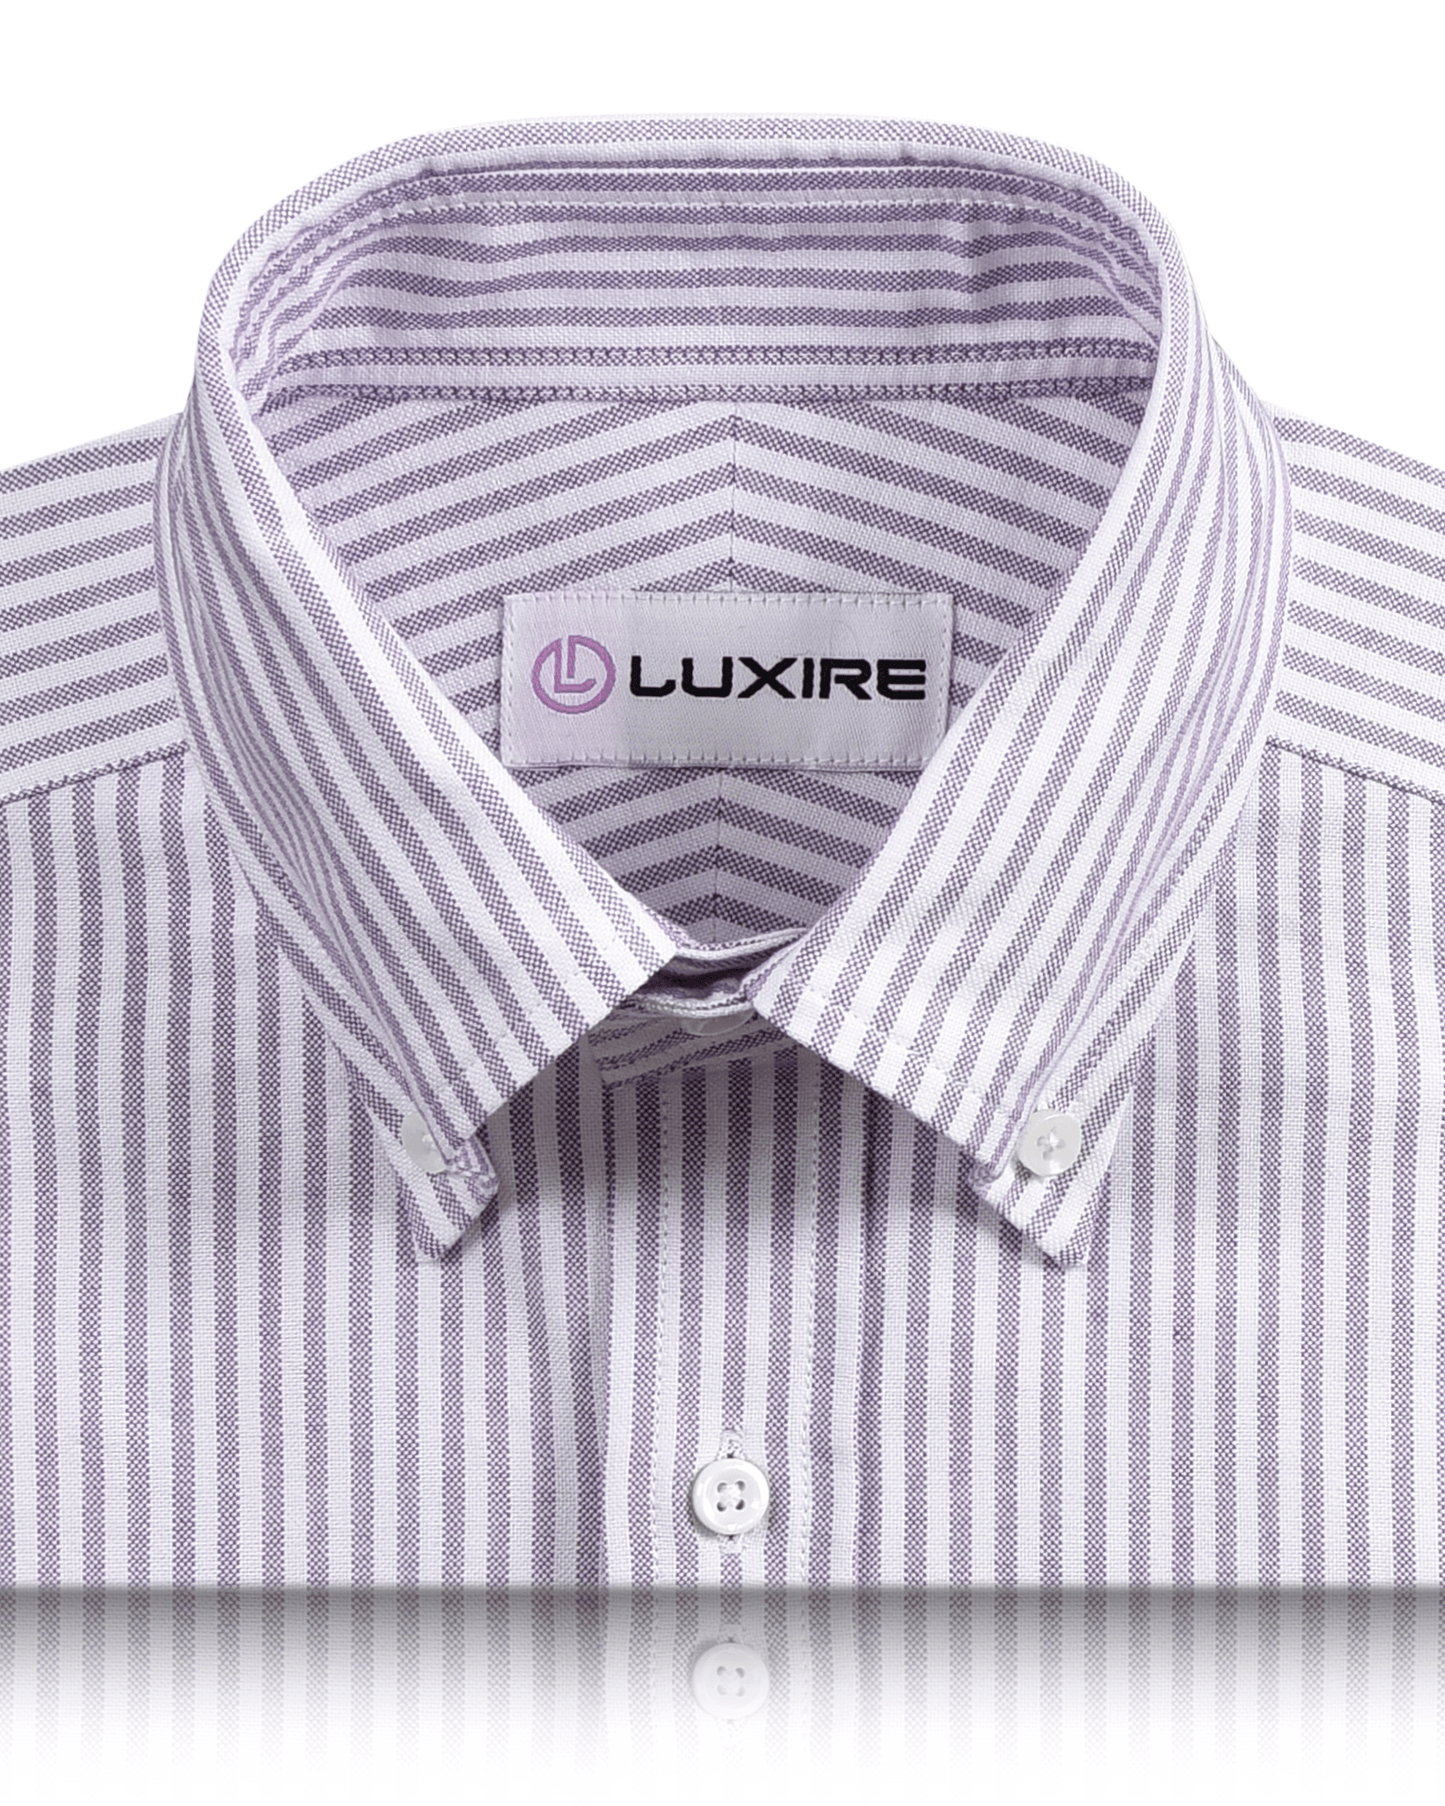 Collar of the custom oxford shirt for men by Luxire in white with purple dress stripes